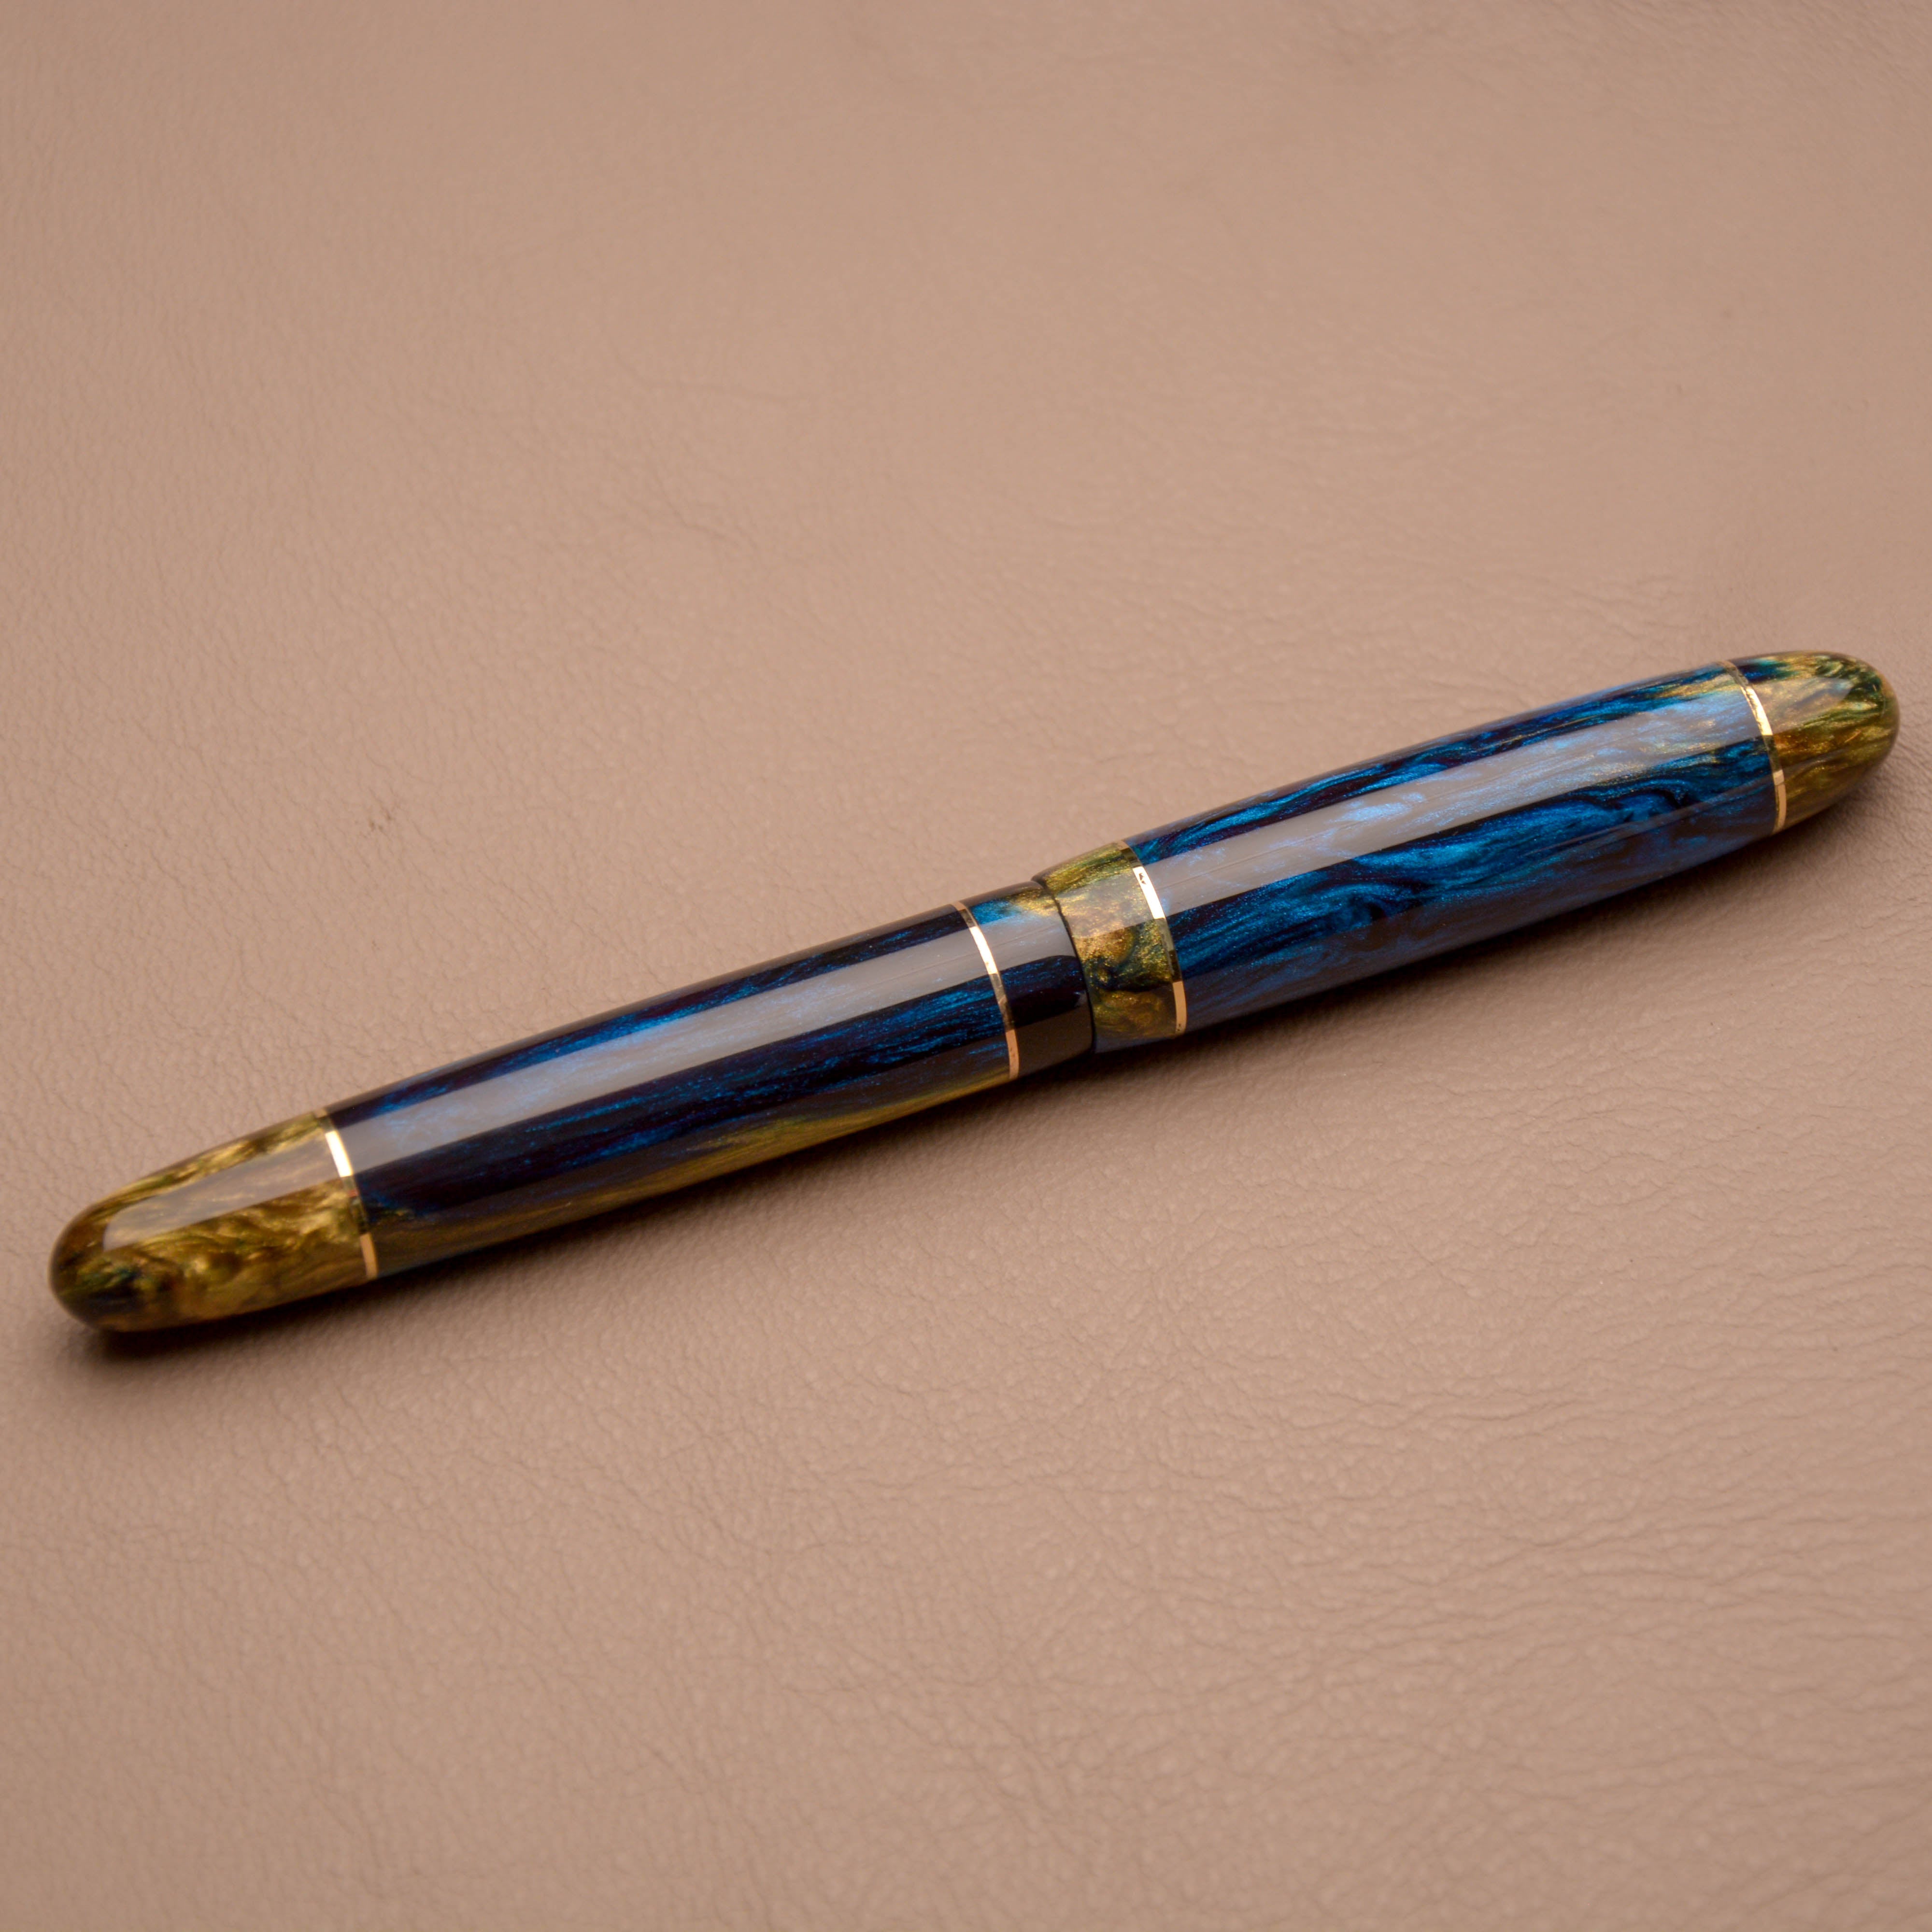 Fountain Pen - Jowo #6 - 13 mm - Blue, black and gold with brass details